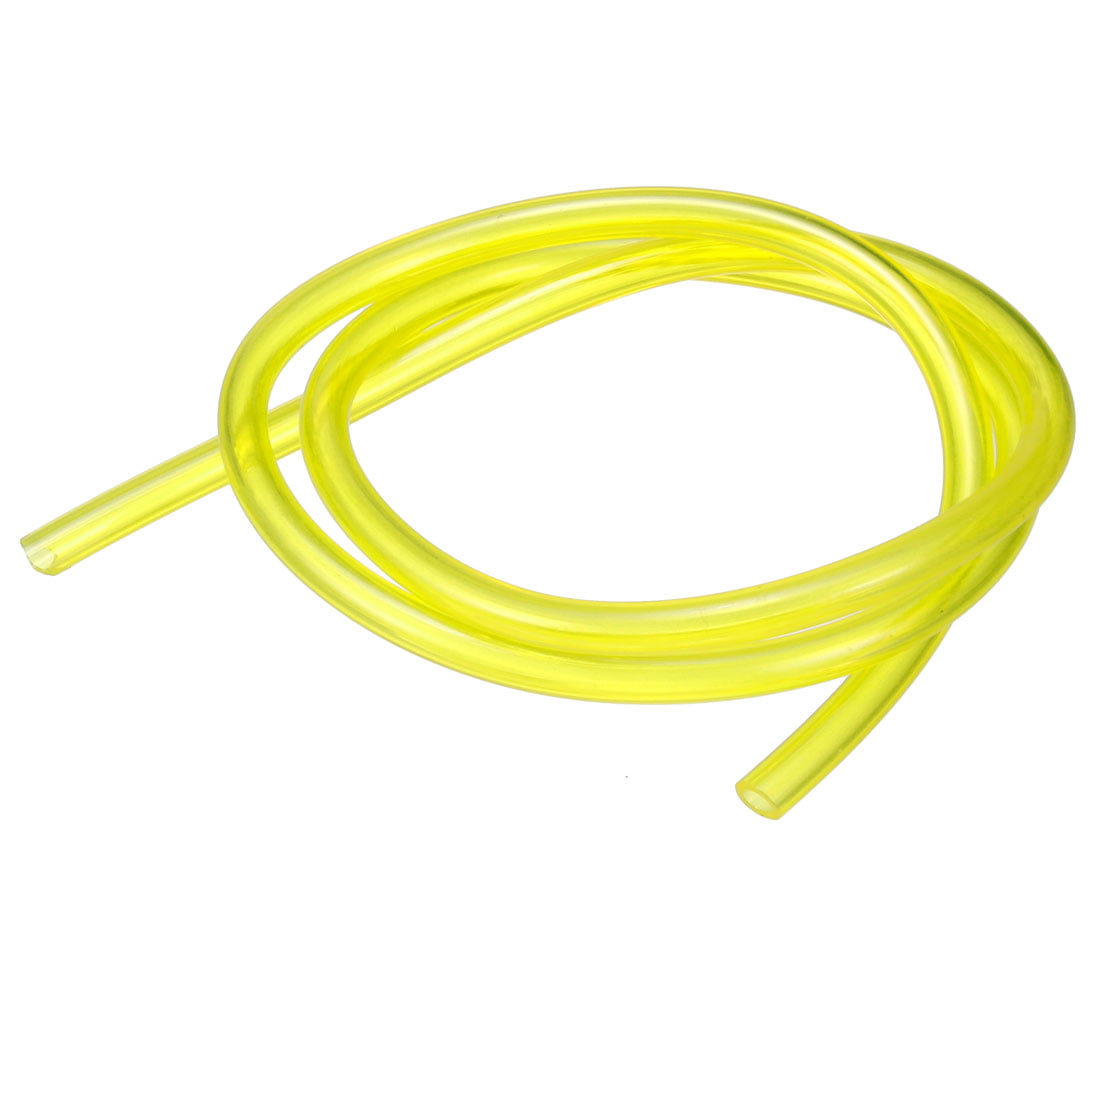 Hose Pipe Plastic Yellow Accessories Petrol Fuel Gas Line Blower 60cm Chainsaws 